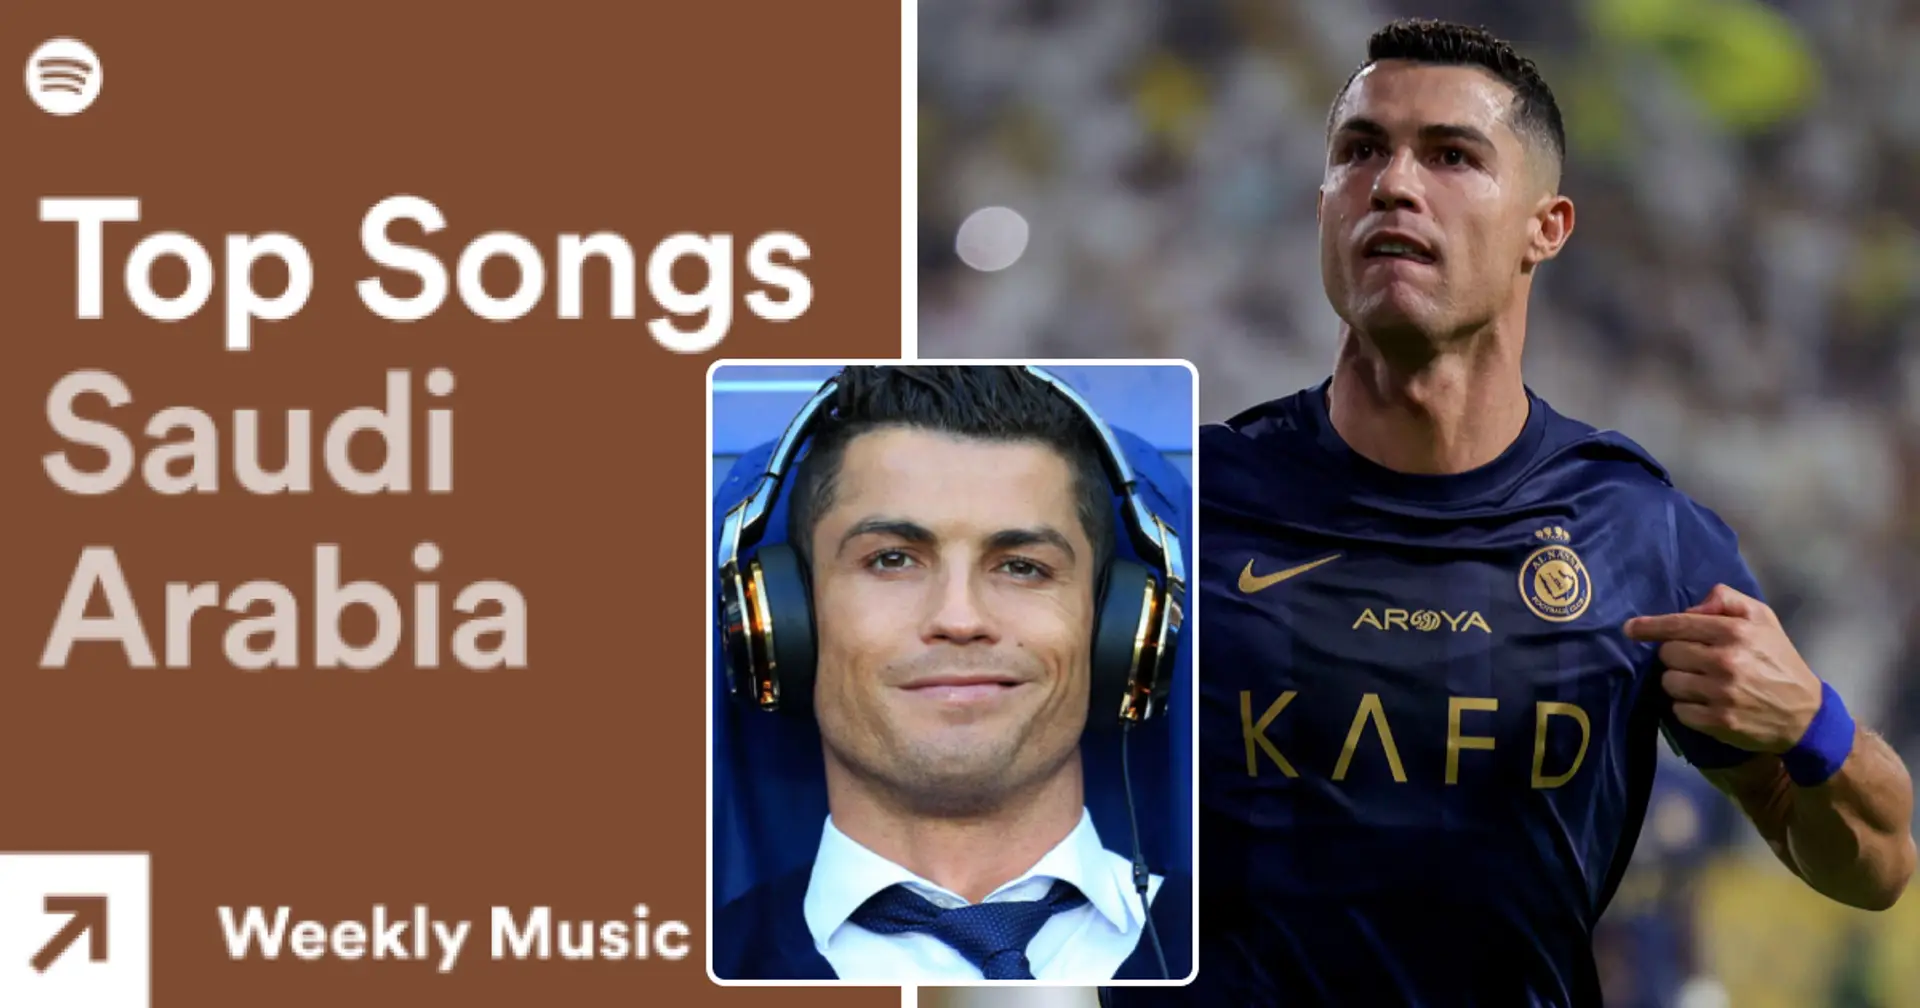 Cristiano Ronaldo helps a 2007 track become the number one song in Saudi Arabia